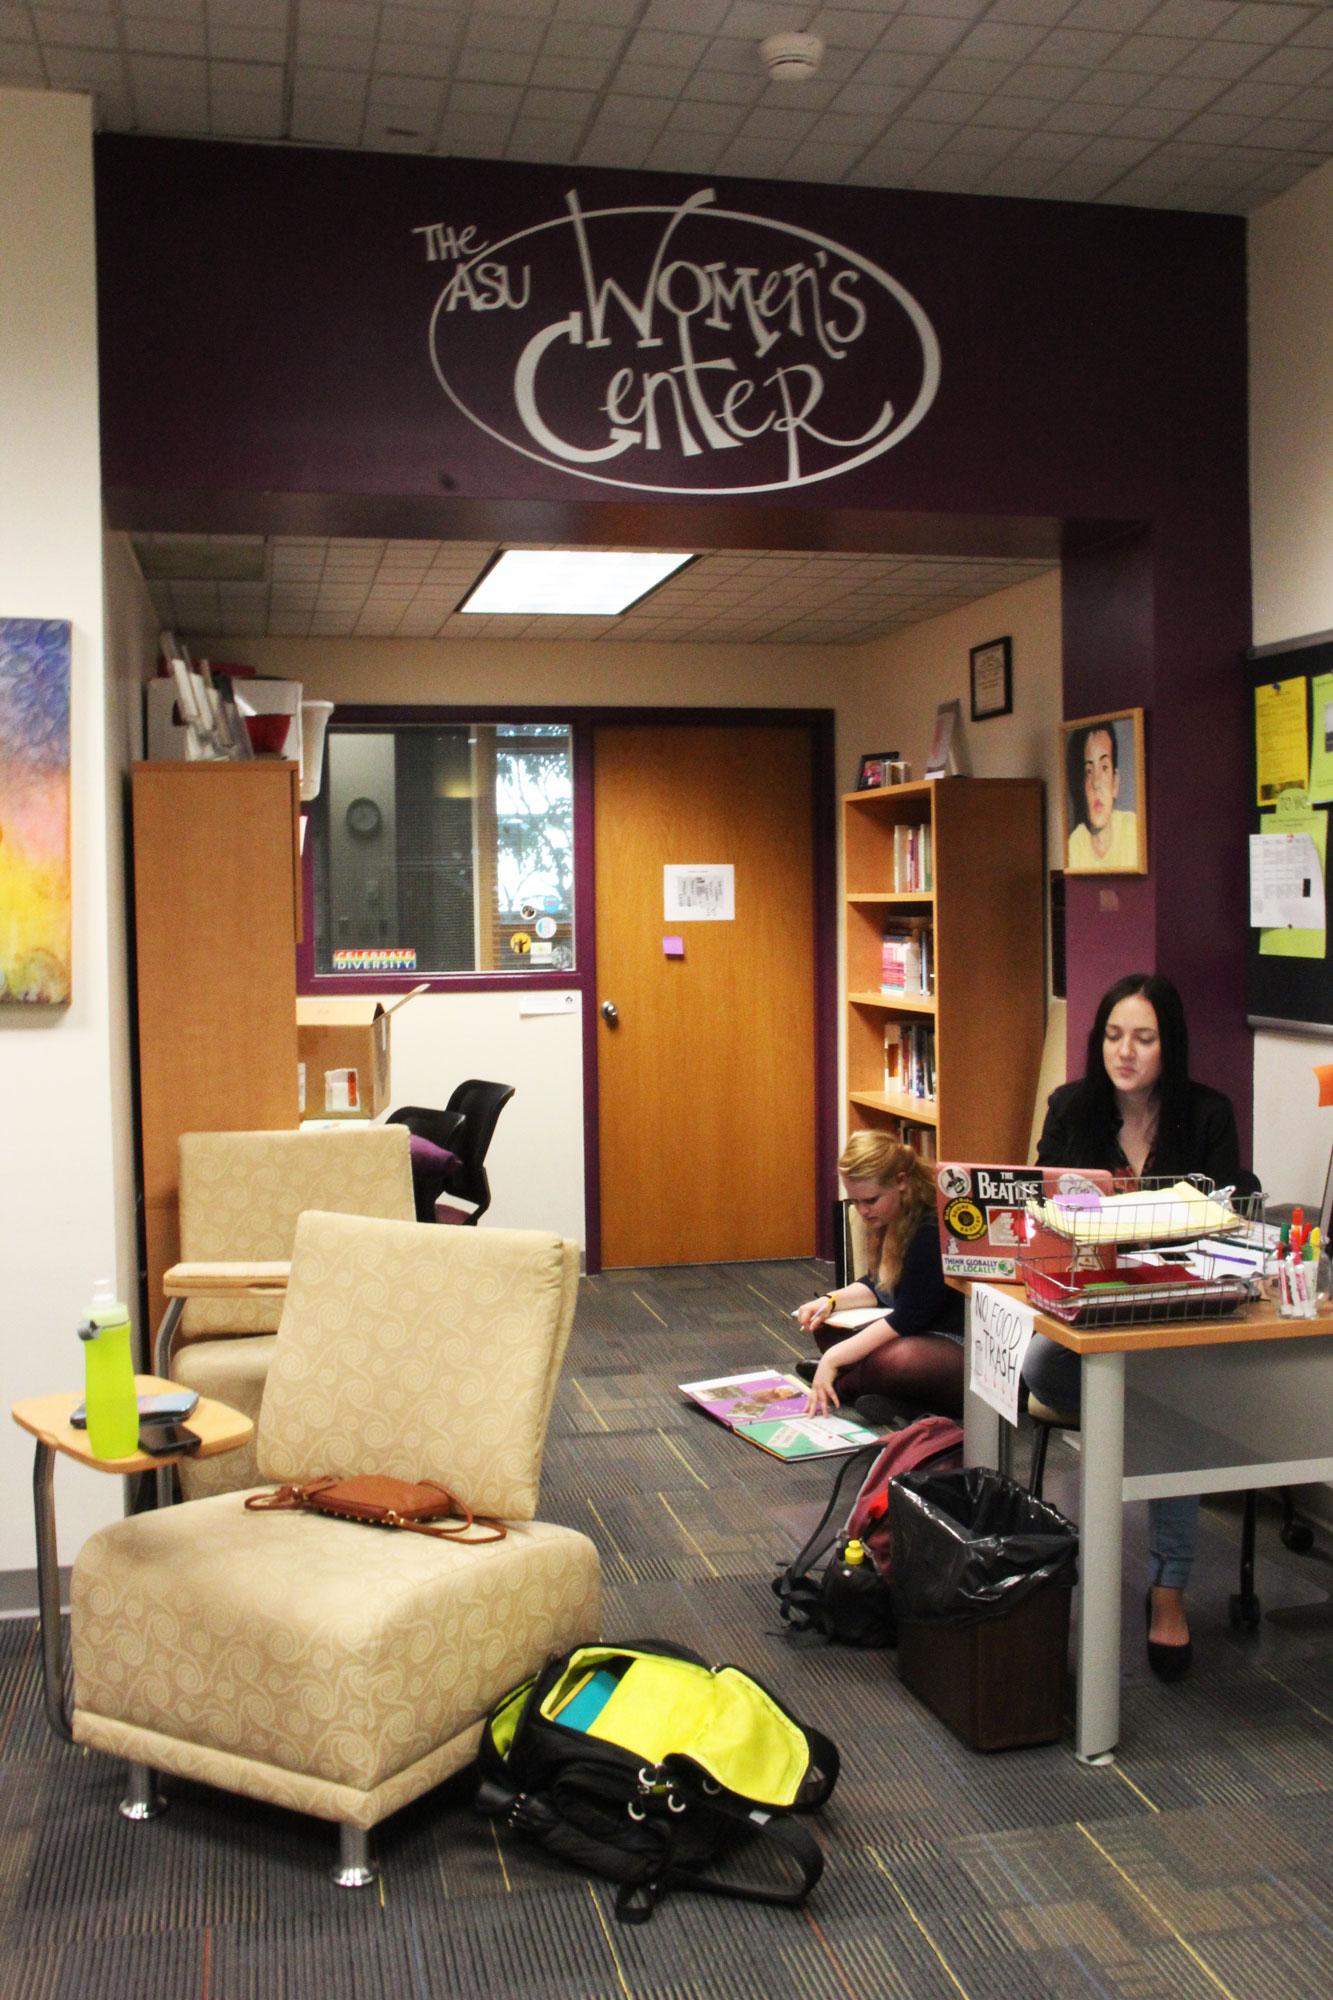 Volunteers at the Women's Center work one-hour desk shifts, answer questions and address concerns from students, faculty and staff. Alex Gates | The Appalachian